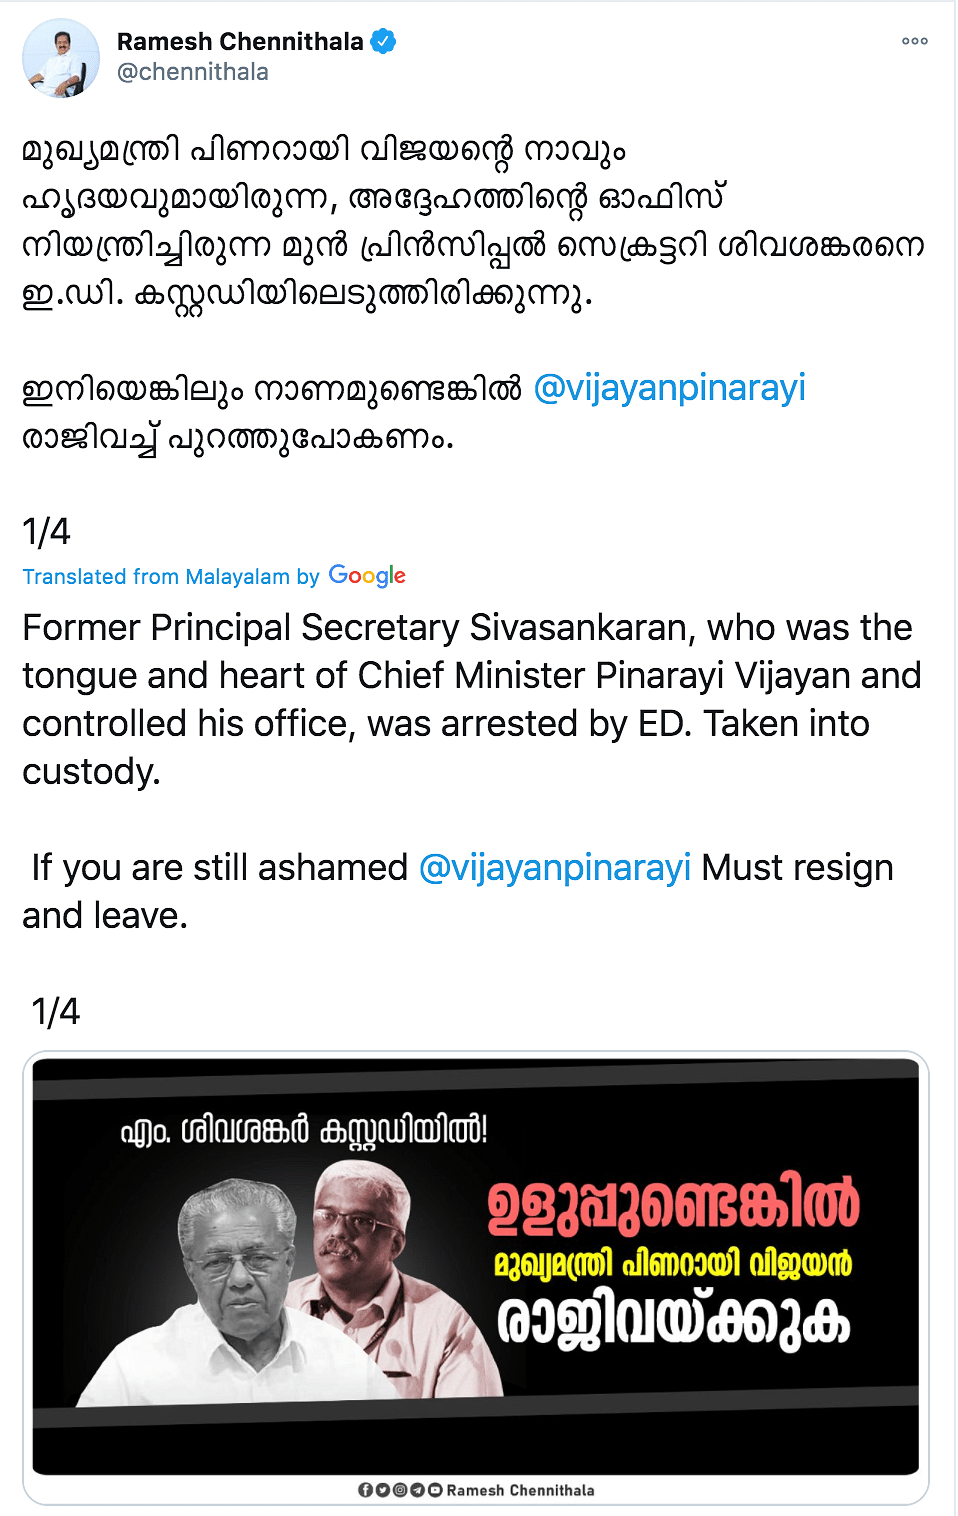 Earlier in the day, Sivasankar was taken into custody by the ED in connection with the case.